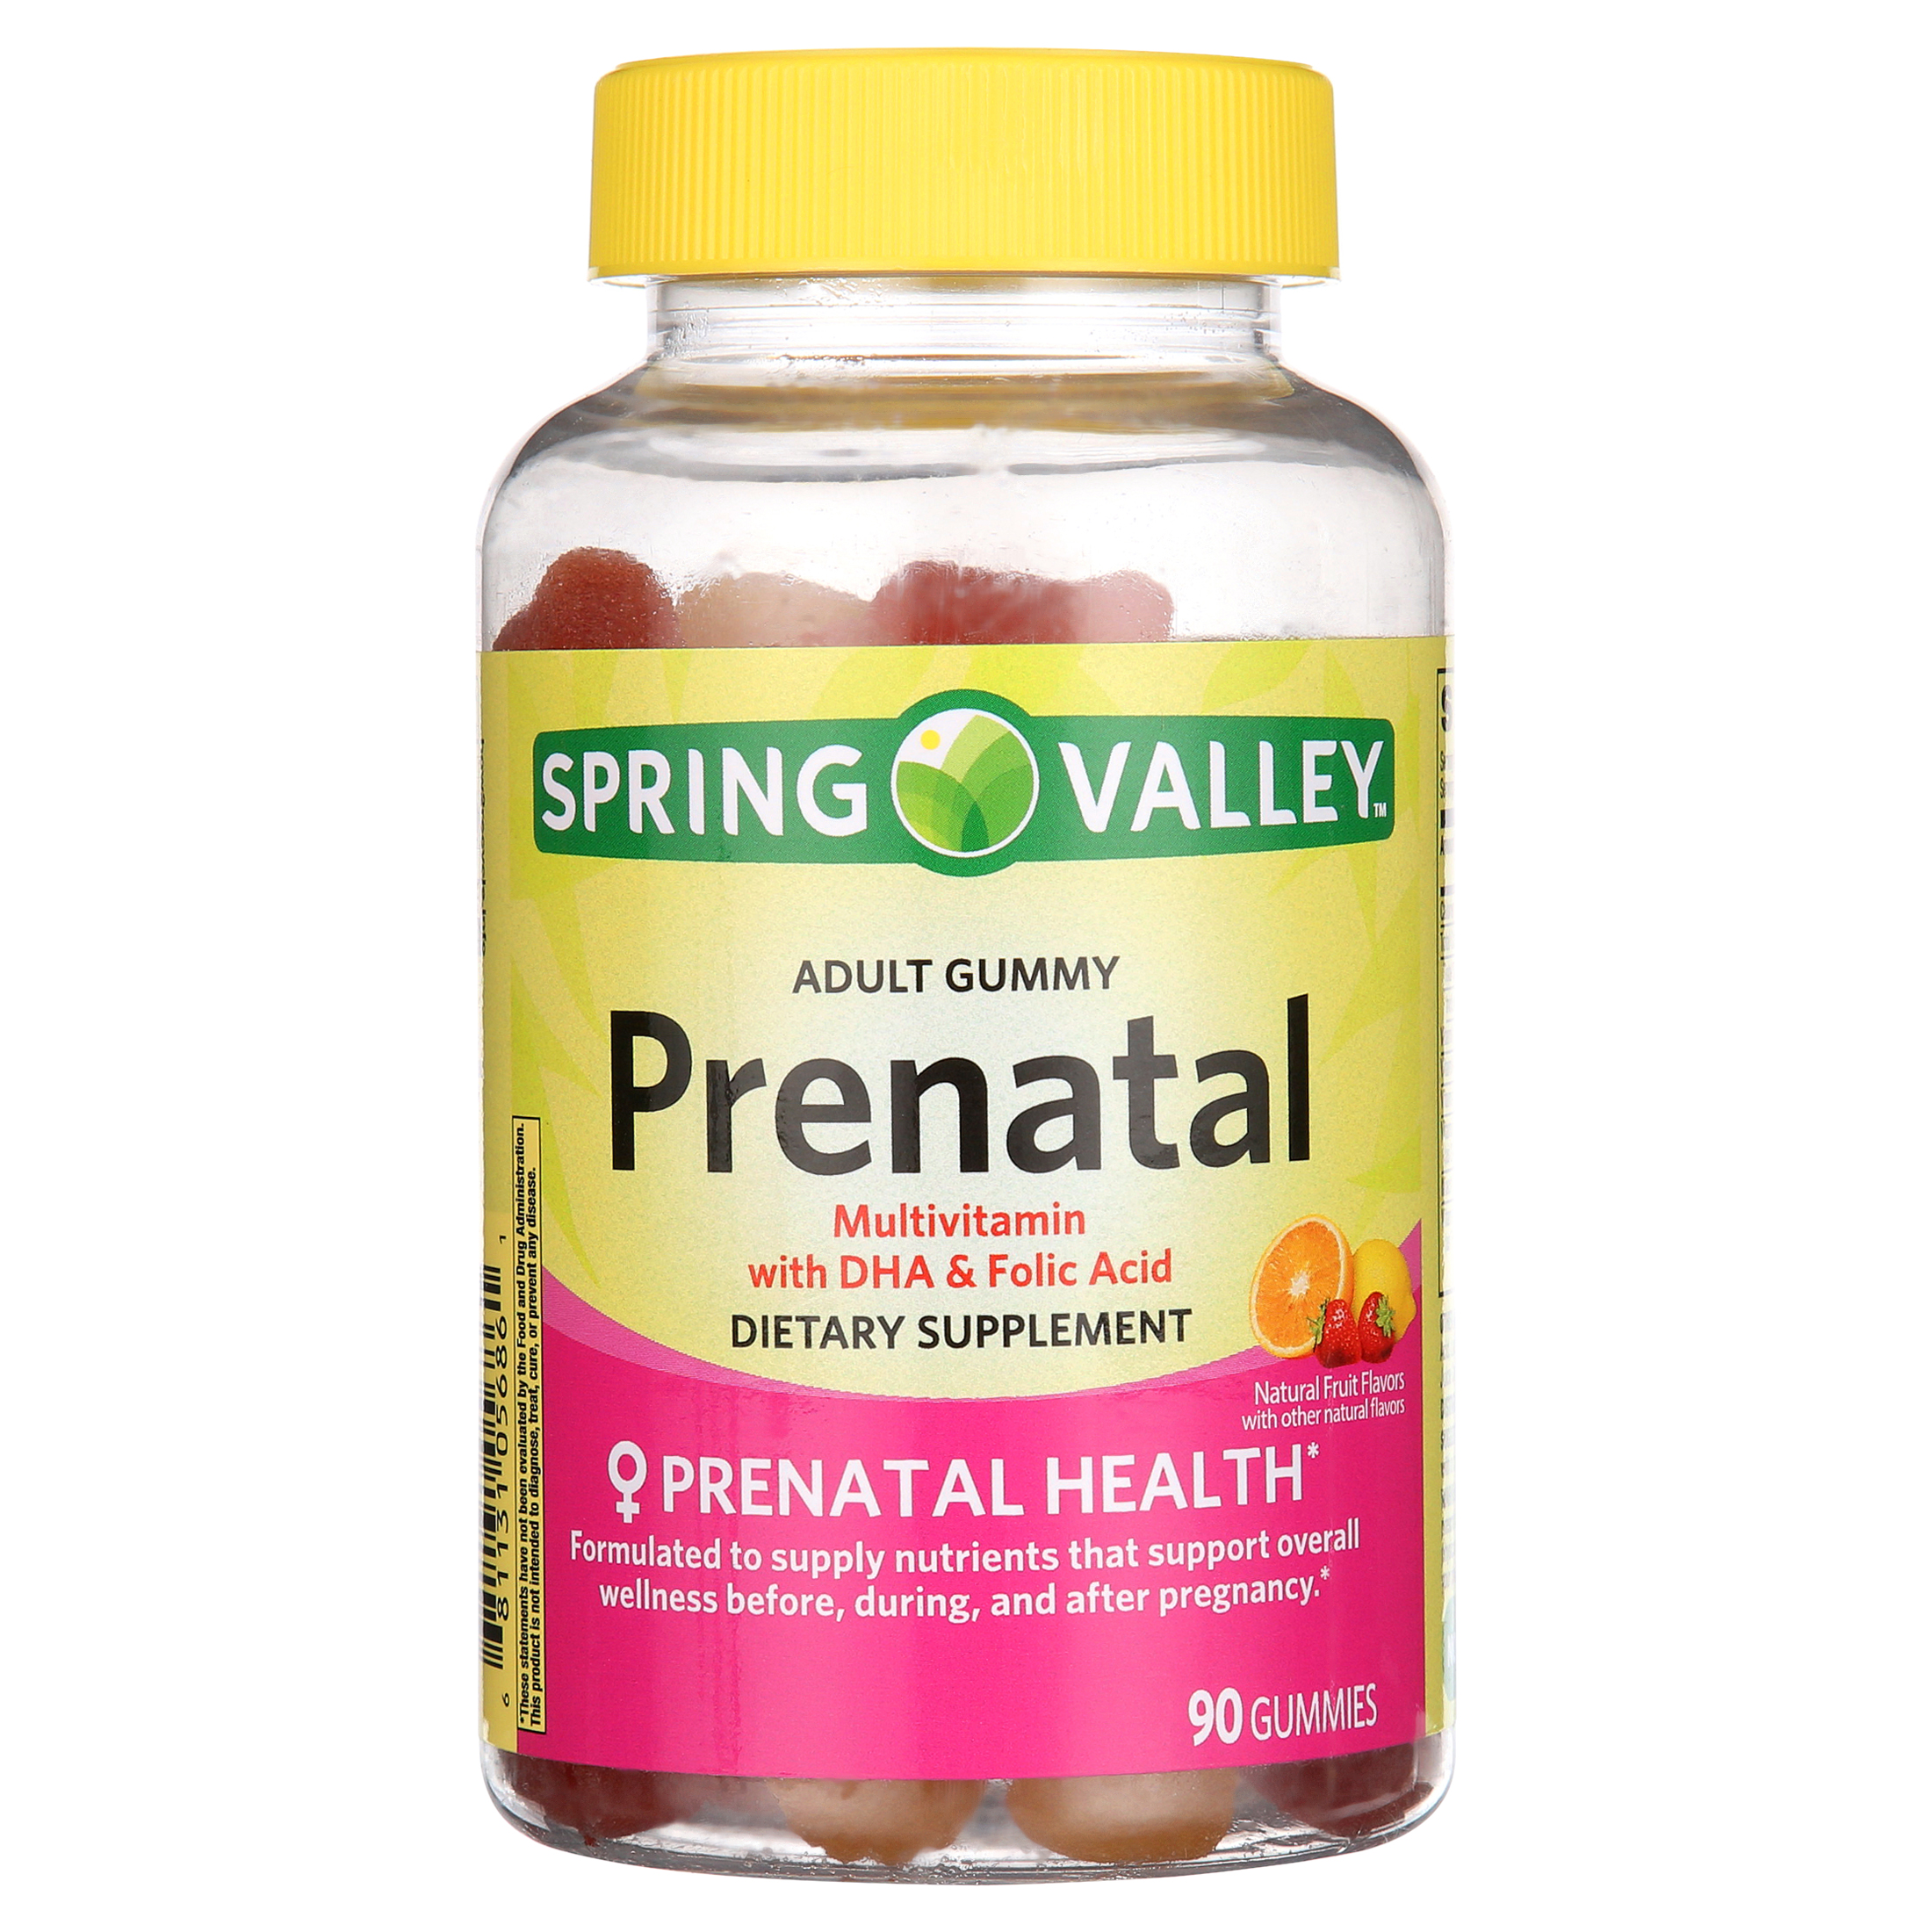 Spring Valley Prenatal Multivitamin Gummies with DHA and Folic Acid, 90 Count - image 1 of 7